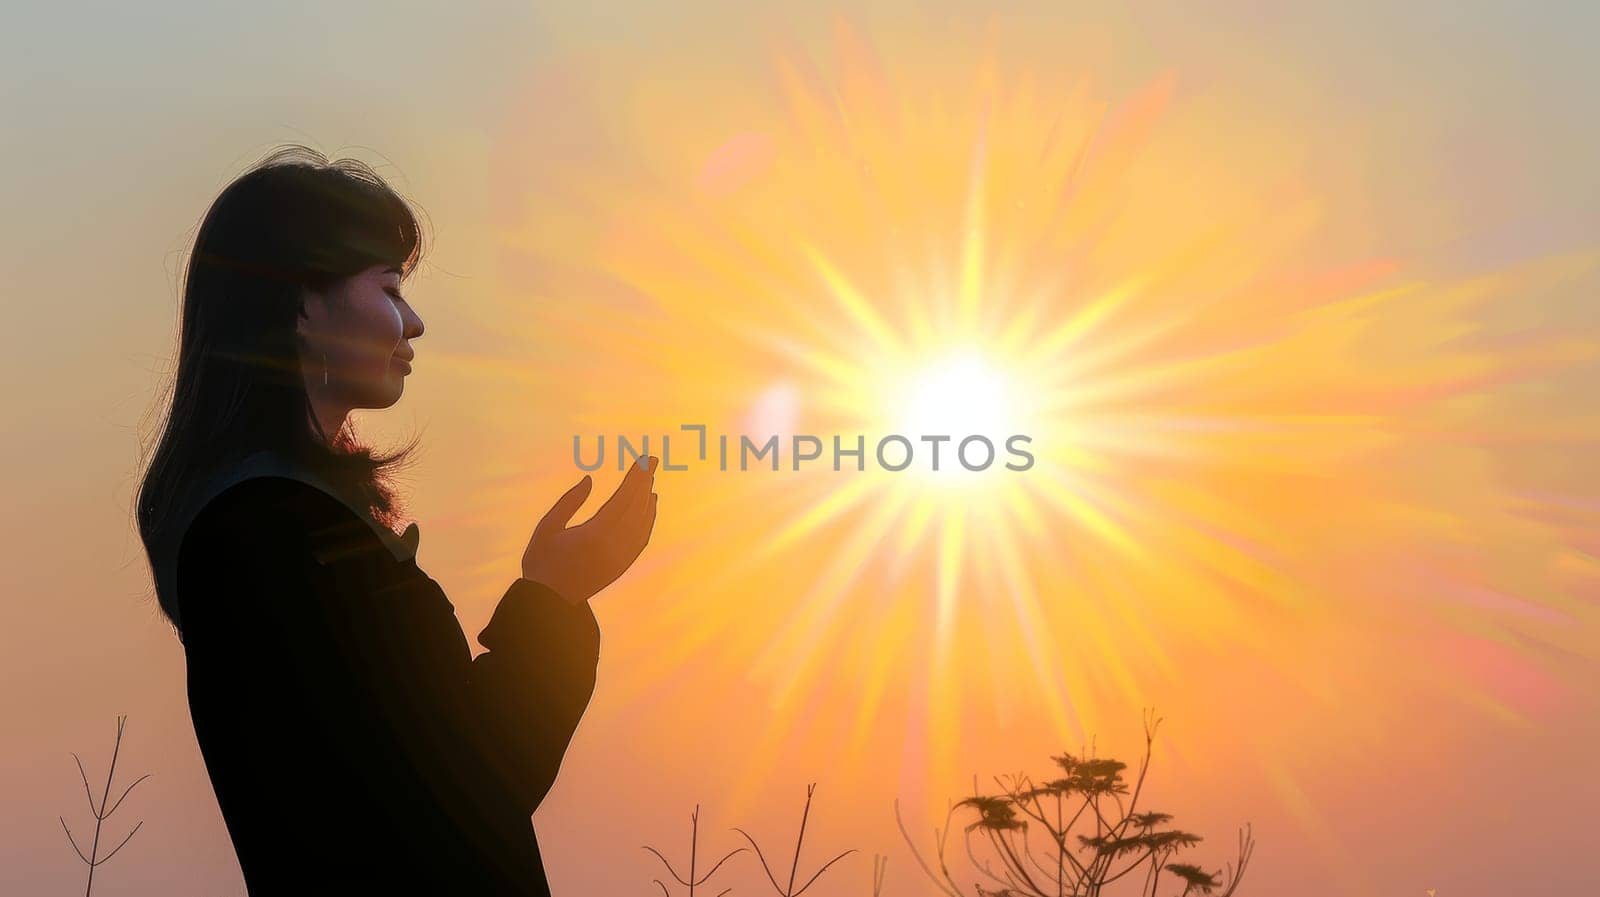 A side view of a person engaging in meditation during sunrise. The sunlight and the serene environment contribute to the theme of inner peace. by sfinks